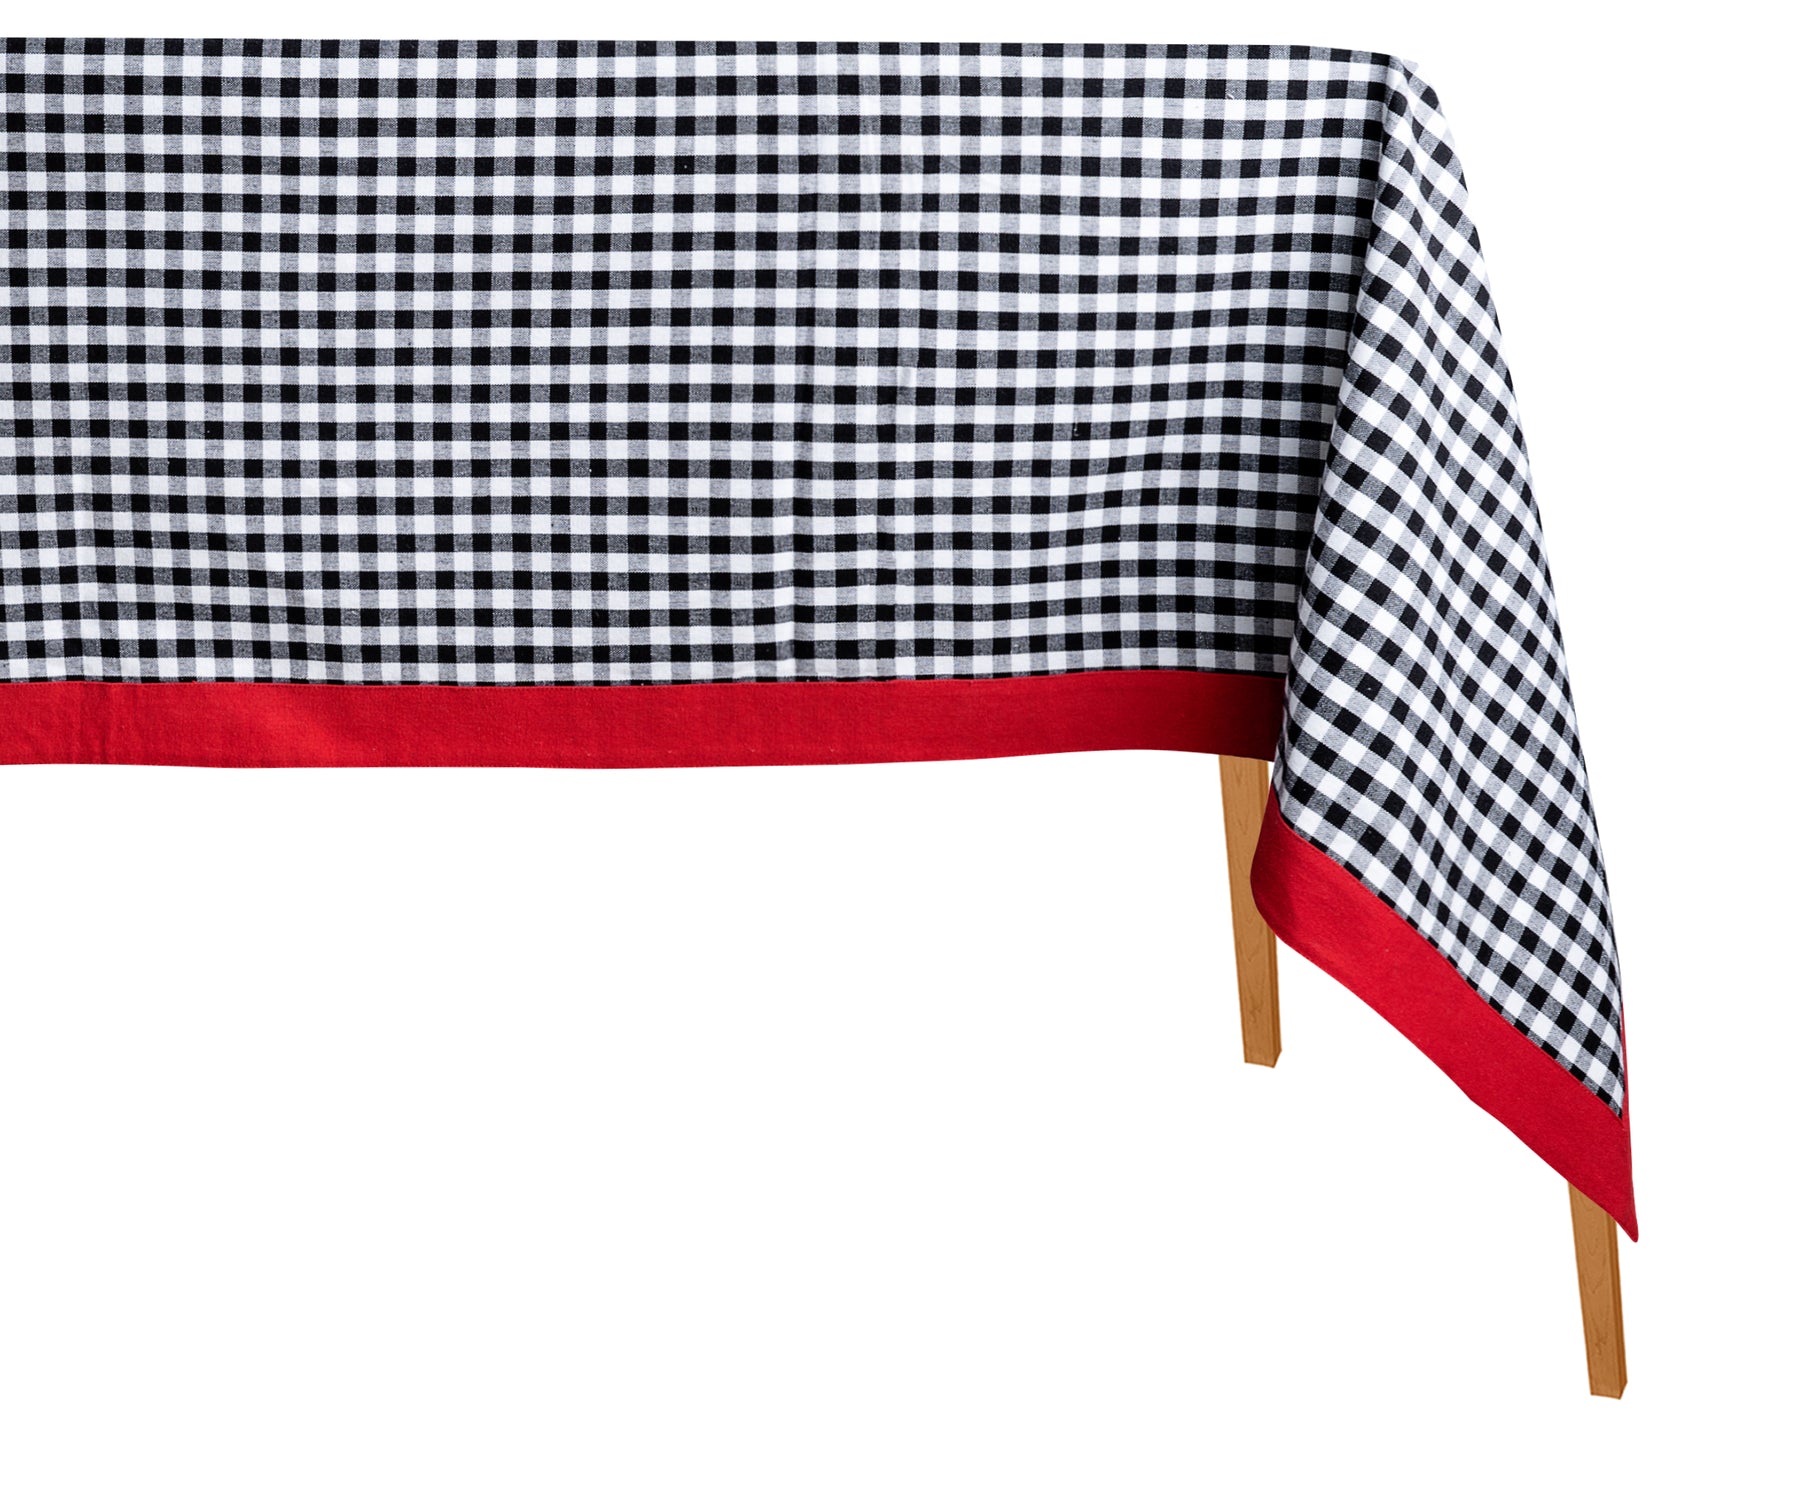 Farmhouse tablecloth with charming gingham accents.